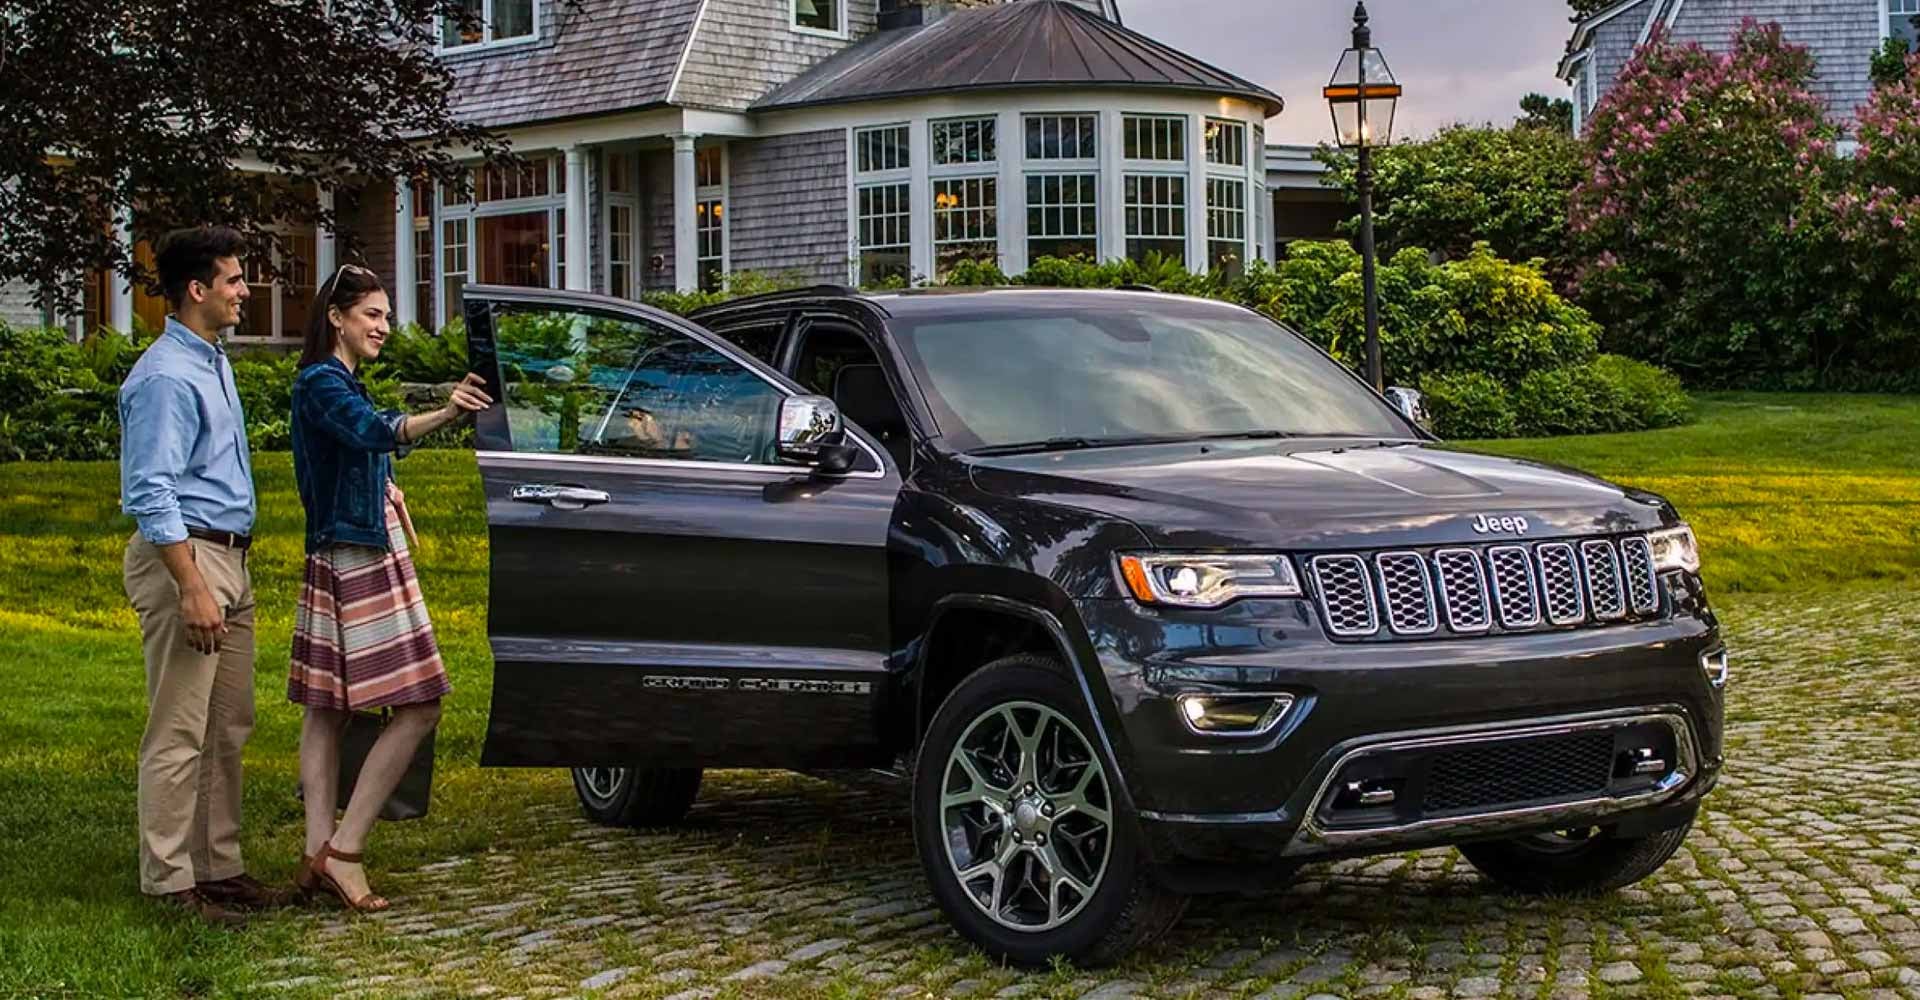 jeep-lease-deals-millsboro-delaware-lease-a-jeep-today